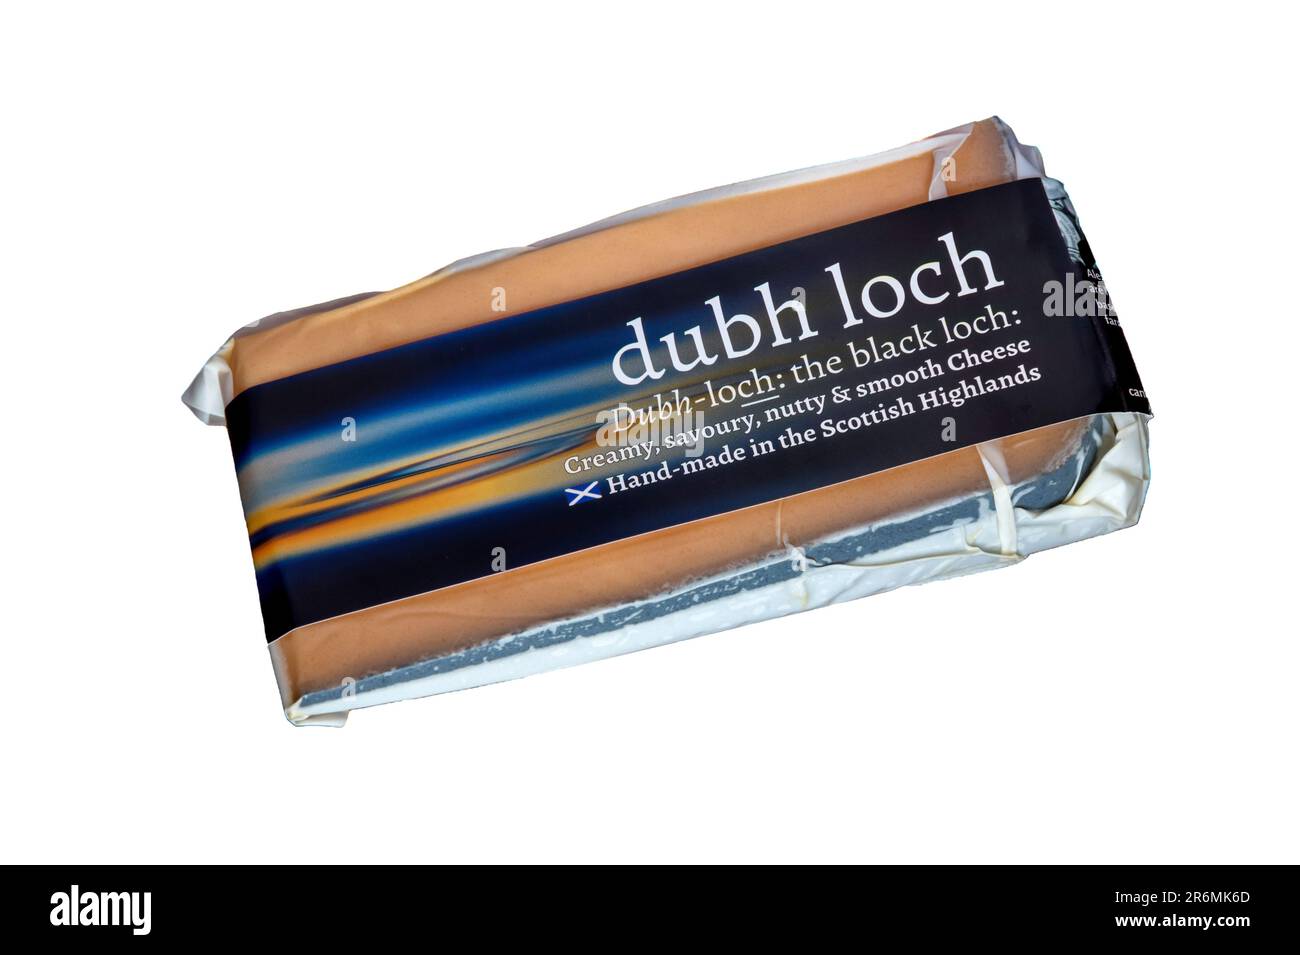 A packet of Dubh Loch cheese made in Scotland. Stock Photo